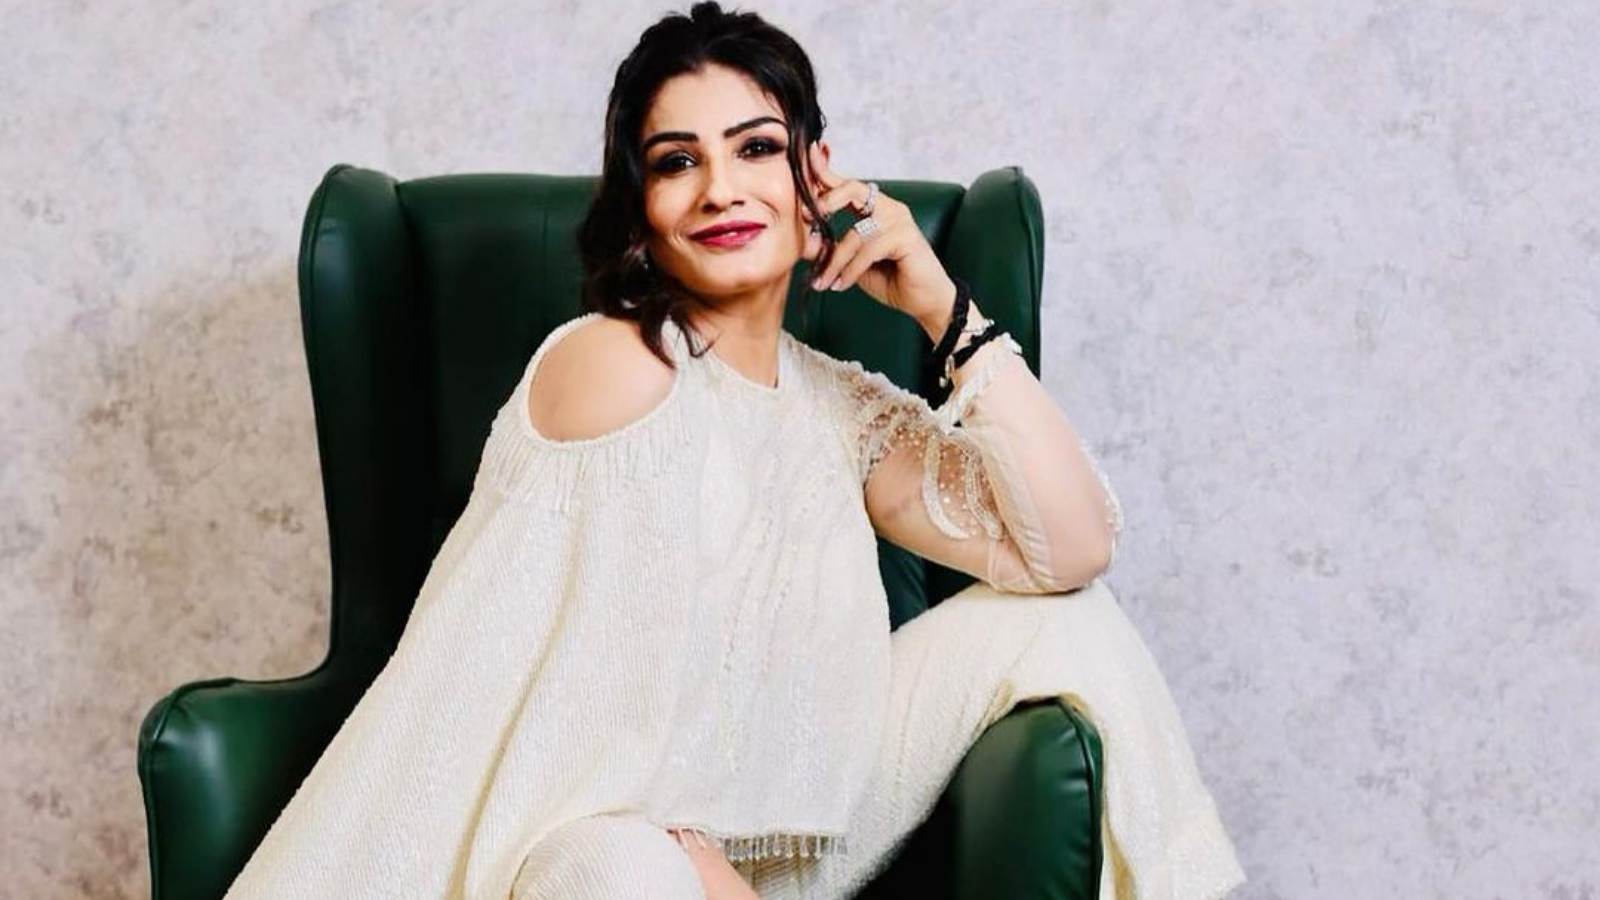 Raveena Tandon Ki Xx Video - Raveena Tandon says South film industry doesn't make 'elitist' films while  Hindi movies have become 'westernised': 'They have started making DVD  copiesâ€¦' | Bollywood News - The Indian Express